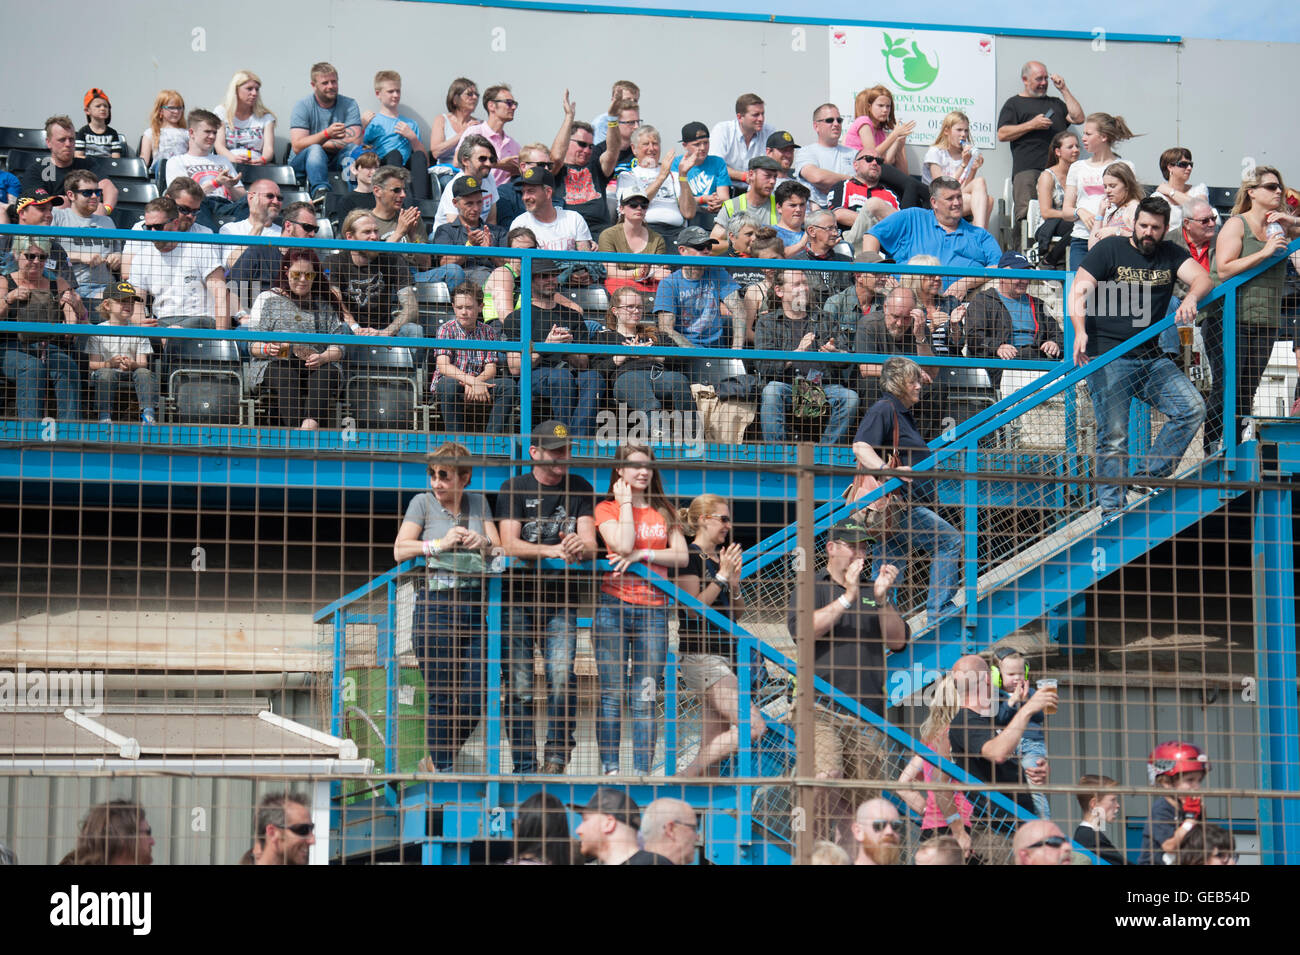 Kings Lynn, Norfolk, United Kingdom. 16.07.2016. Fifth annual Dirt Quake festival with Guy Martin and Carl 'Foggy' Fogarty. Pictured are crowds watching the action. Stock Photo